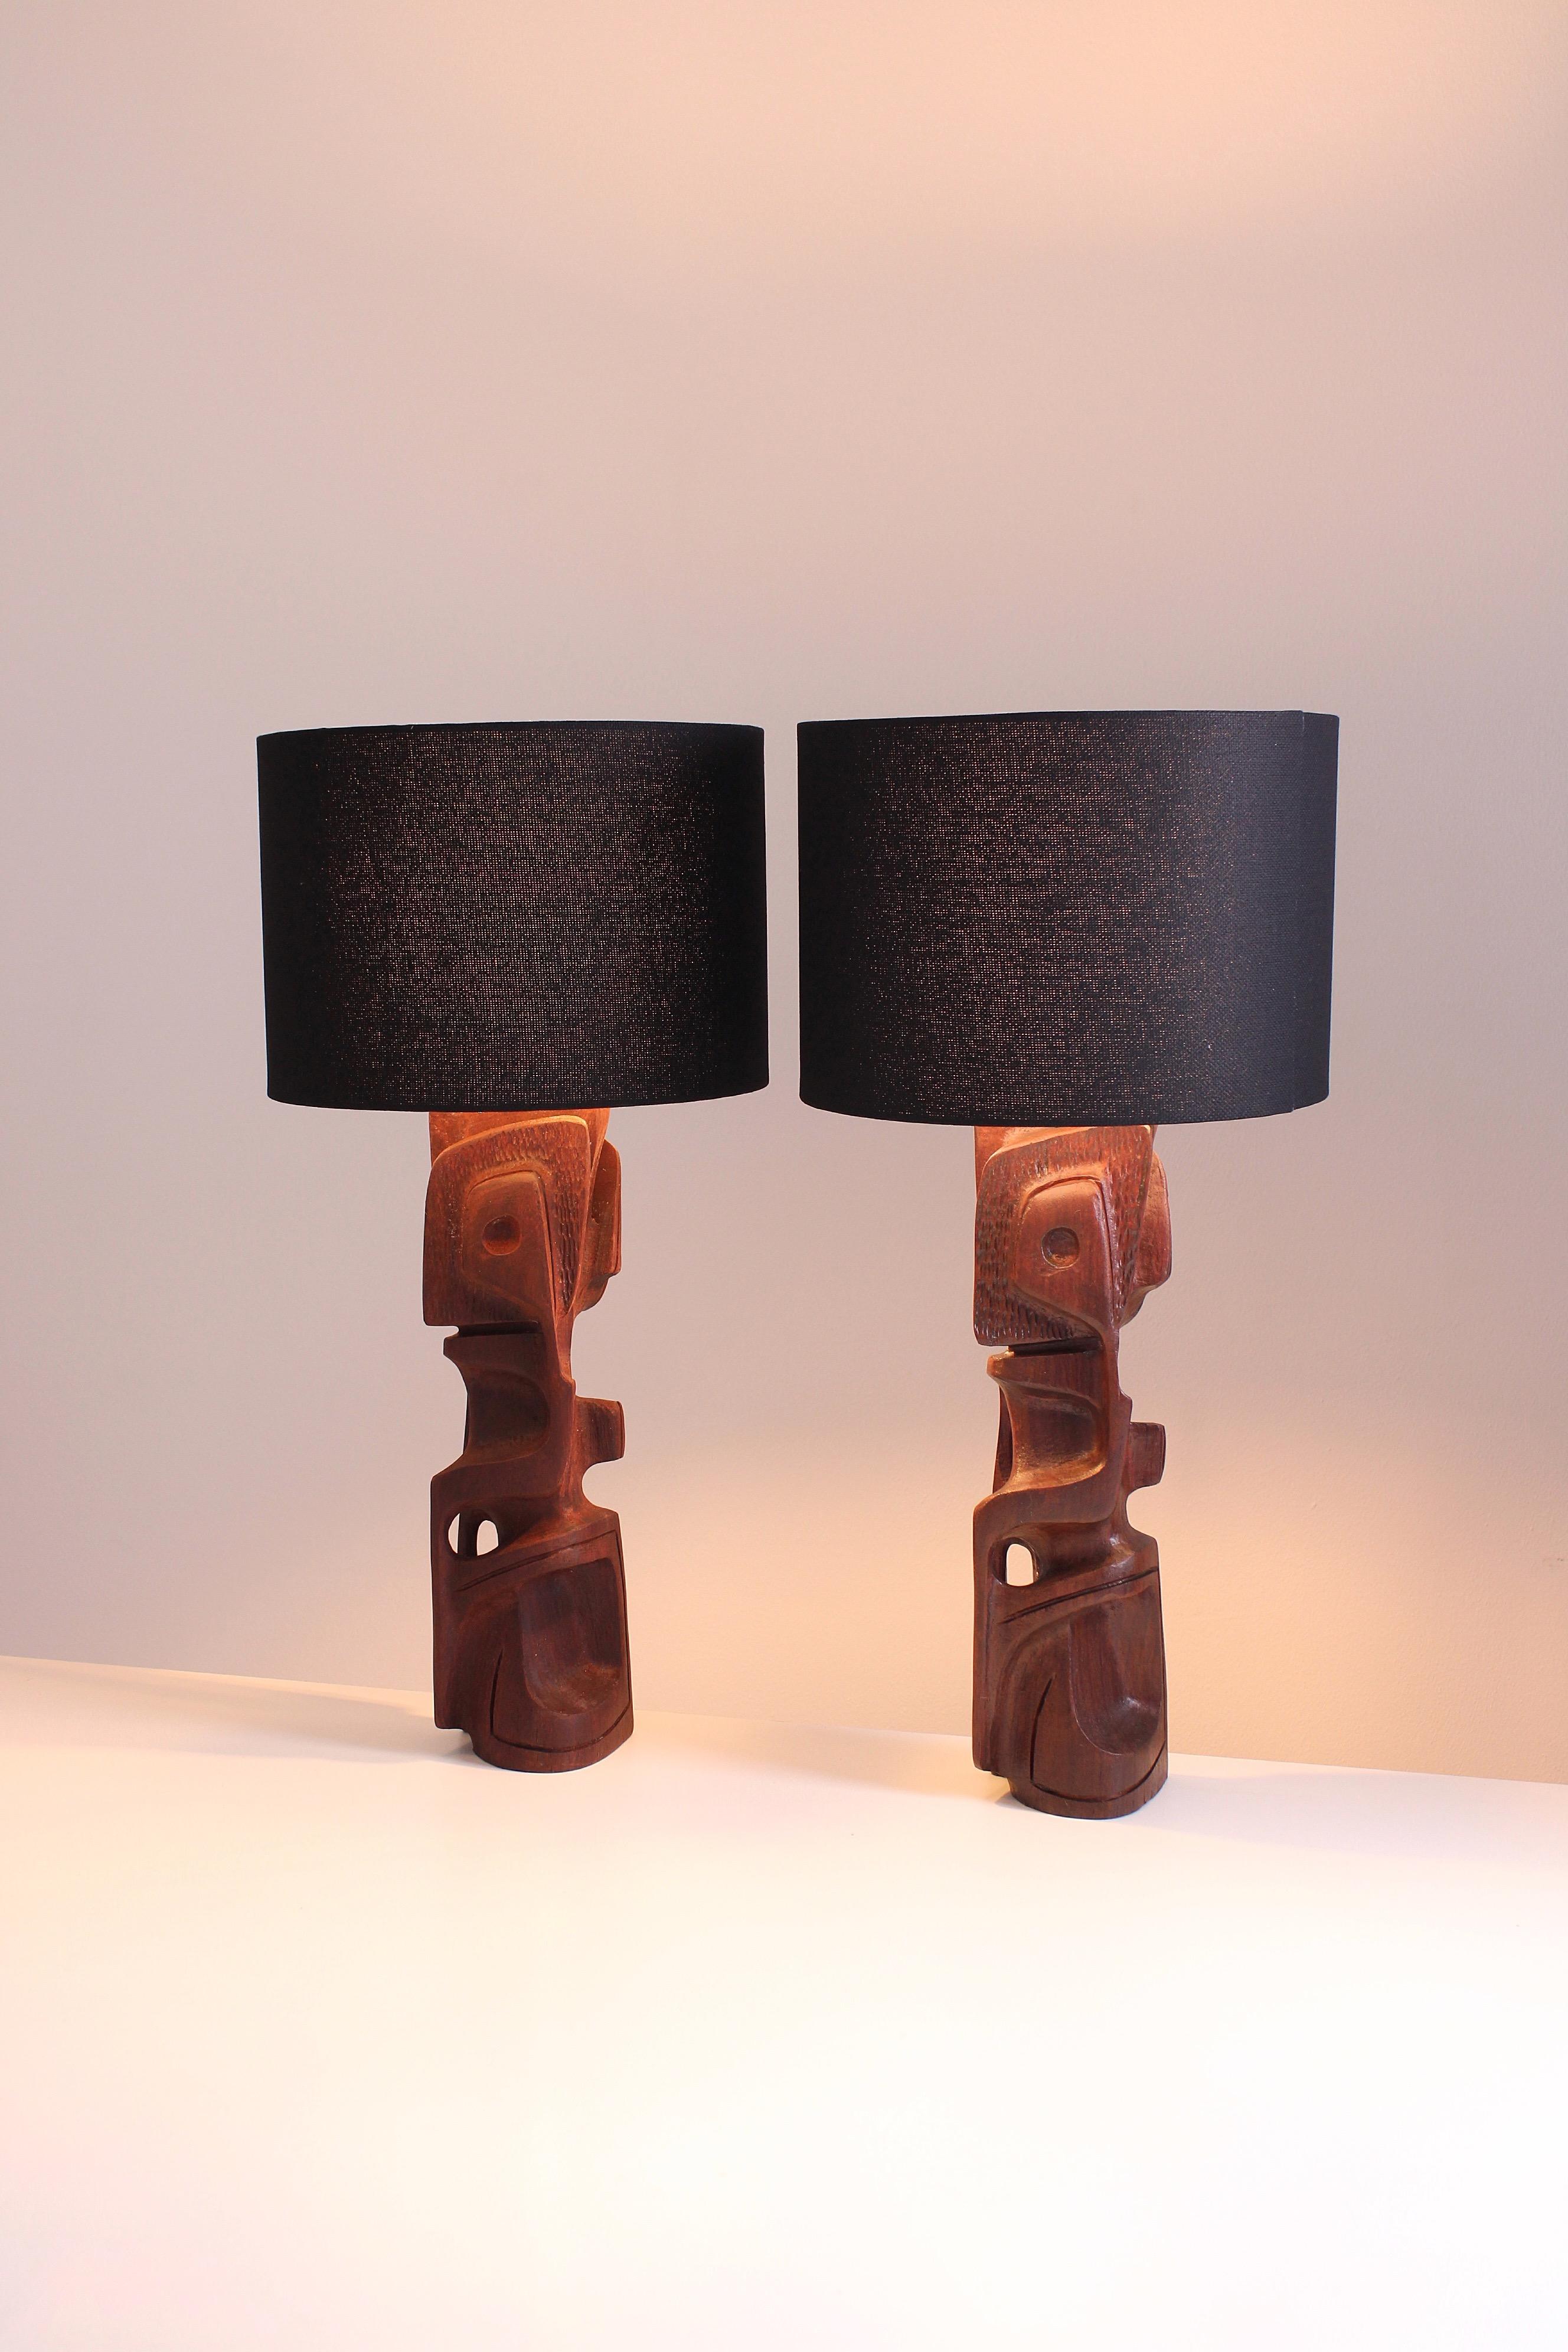 Late 20th Century Pair of sculptural table lamps in Padouk wood by Gianni Pinna, 1970s For Sale